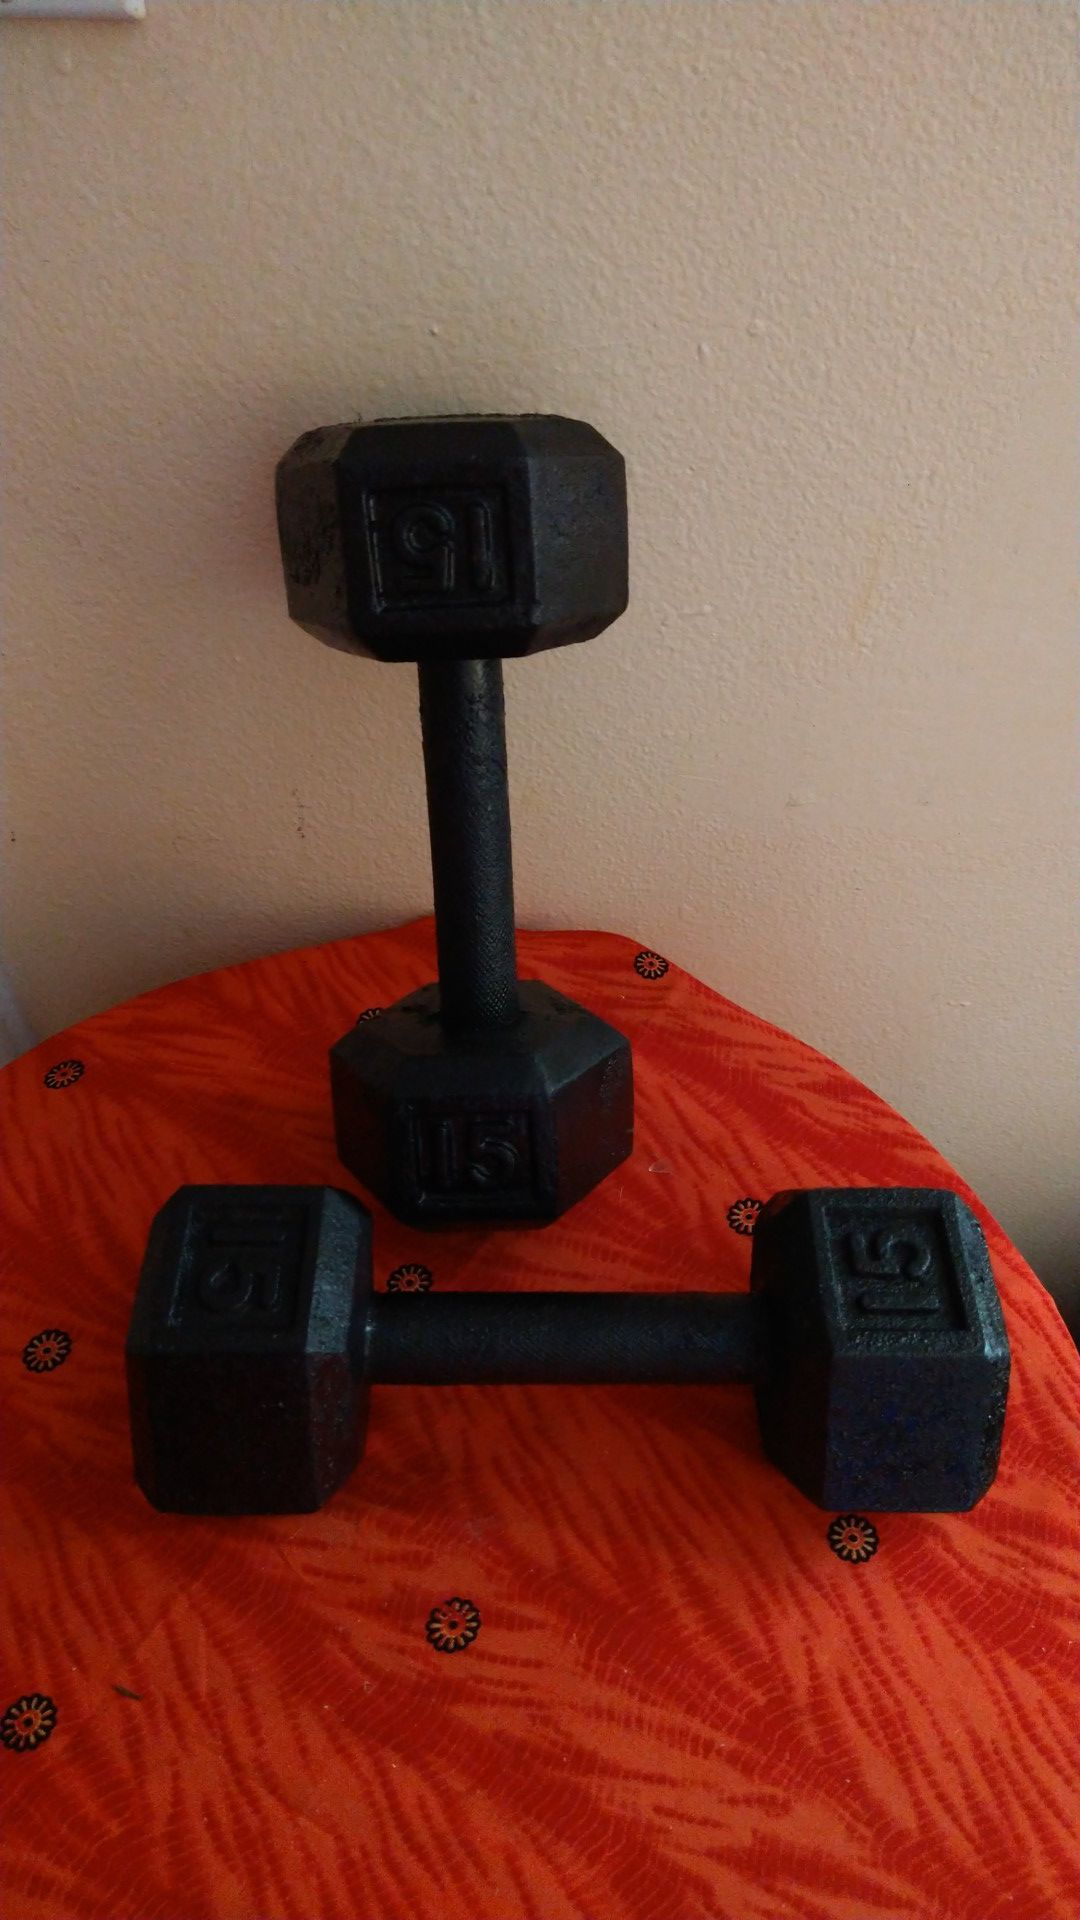 Dumbbell weights 15pounds each weight